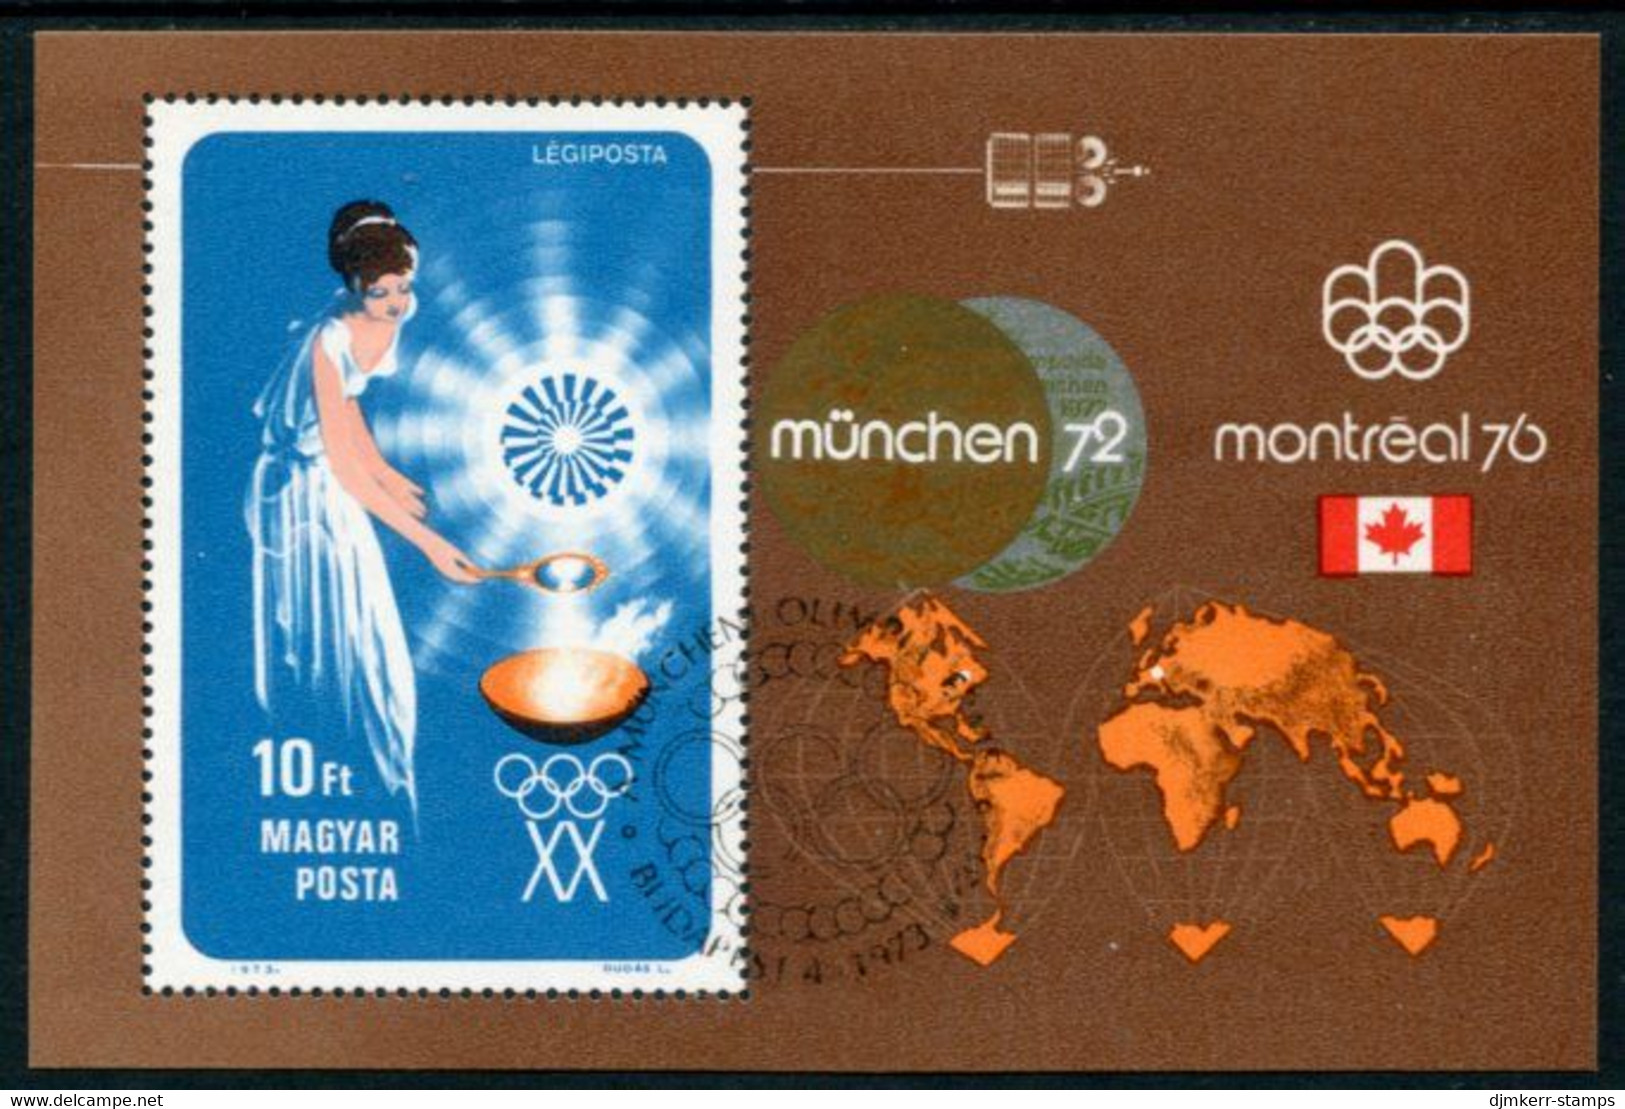 HUNGARY 1973 Olympic Games Publicity Block Used.  Michel Block 96 - Used Stamps